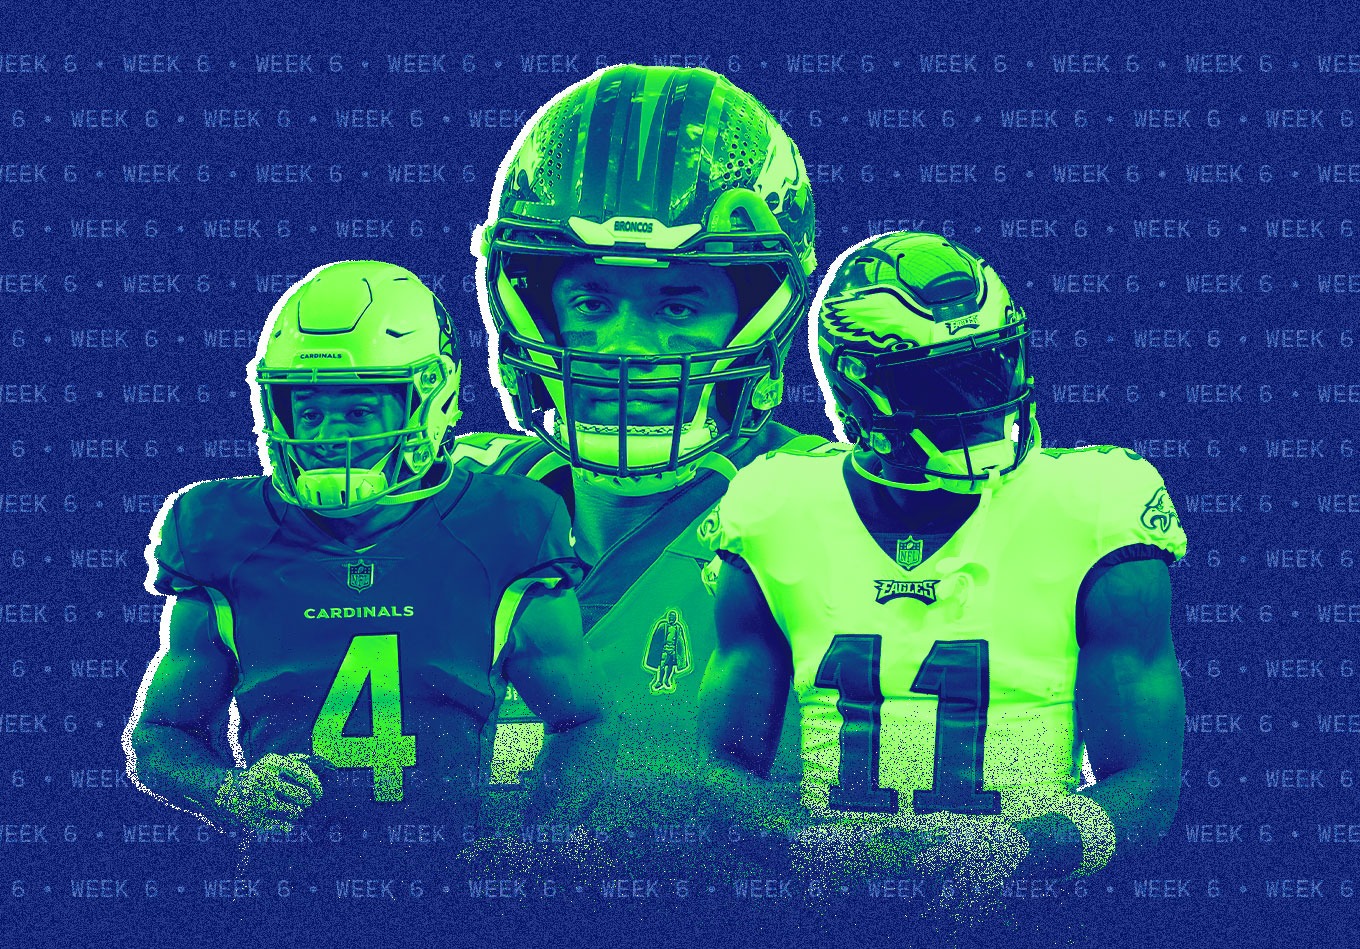 The Yays and Nays: Our Week 6 Fantasy Football Rankings and Projections